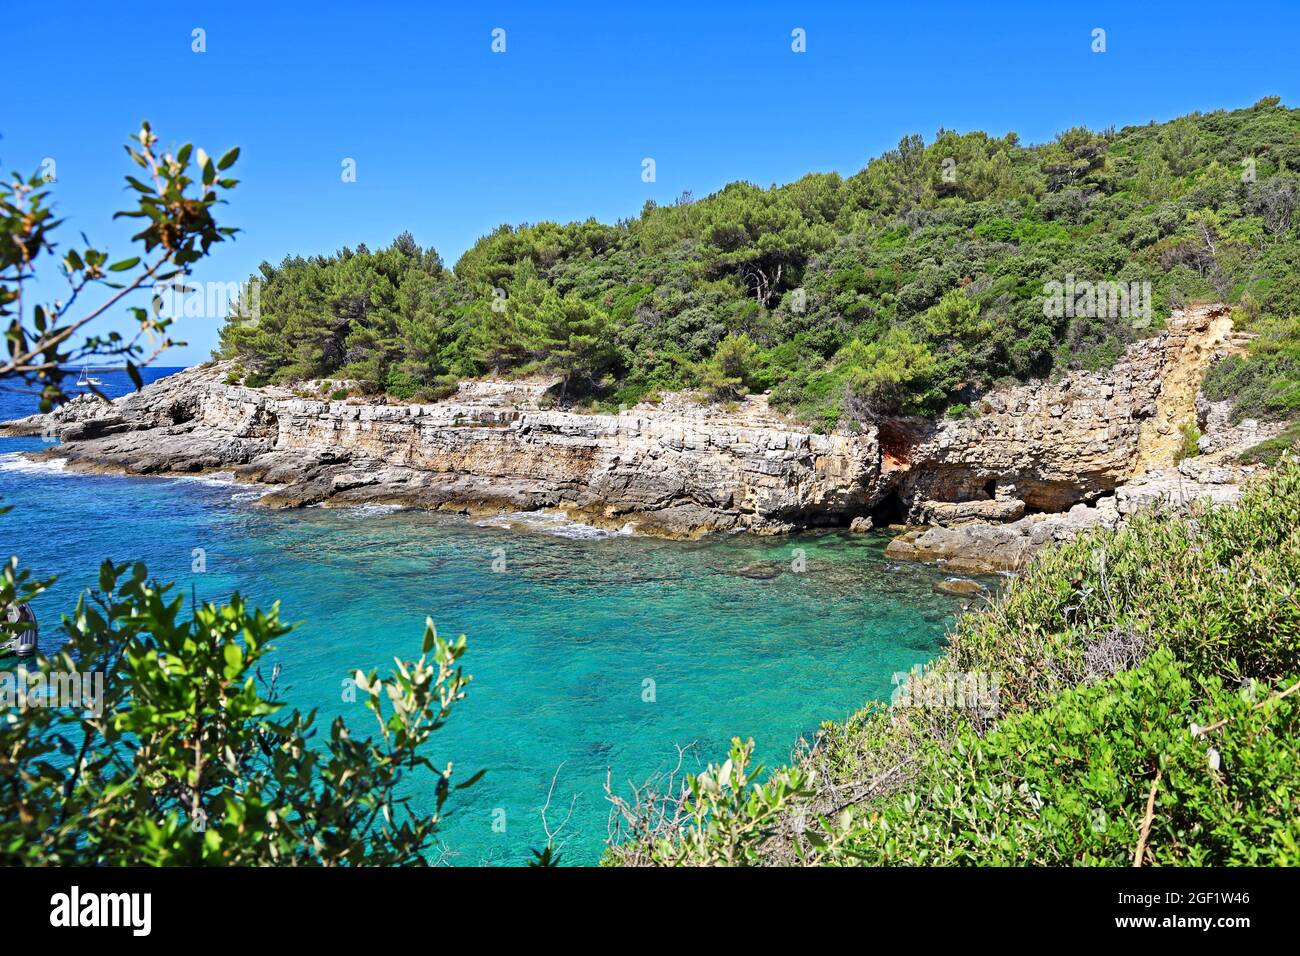 beautiful bay in croatia on the adriatic sea with stone cliffs and turquoise blue water Stock Photo